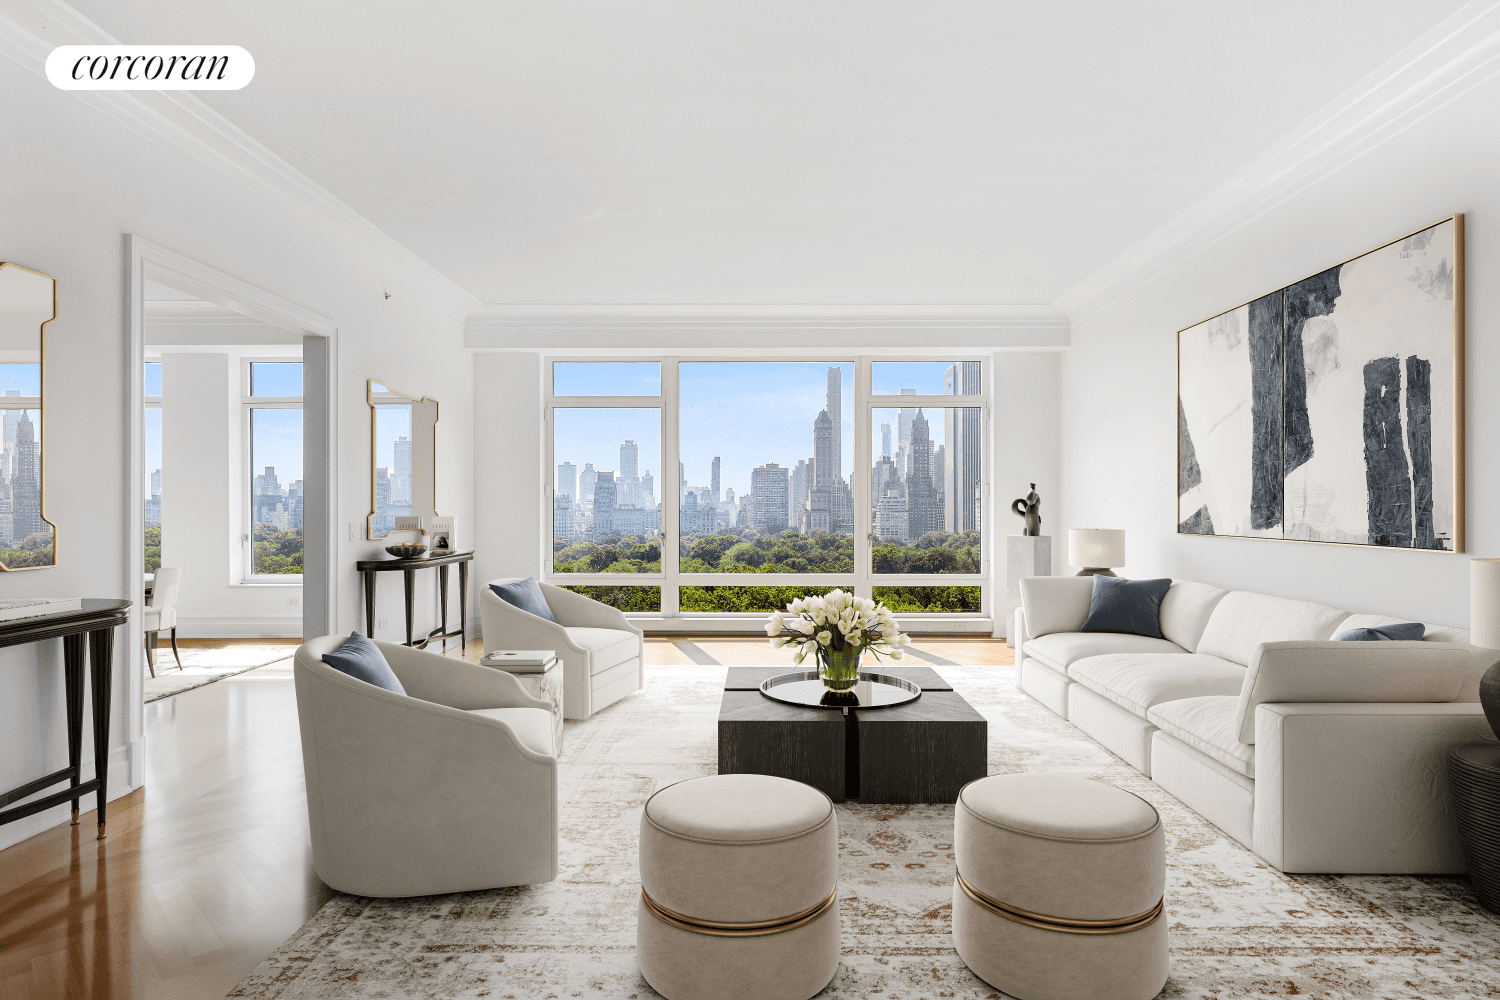 Perfectly located on the 14th Floor in the exclusive House section of 15 Central Park West, this spectacular sun flooded Robert A.